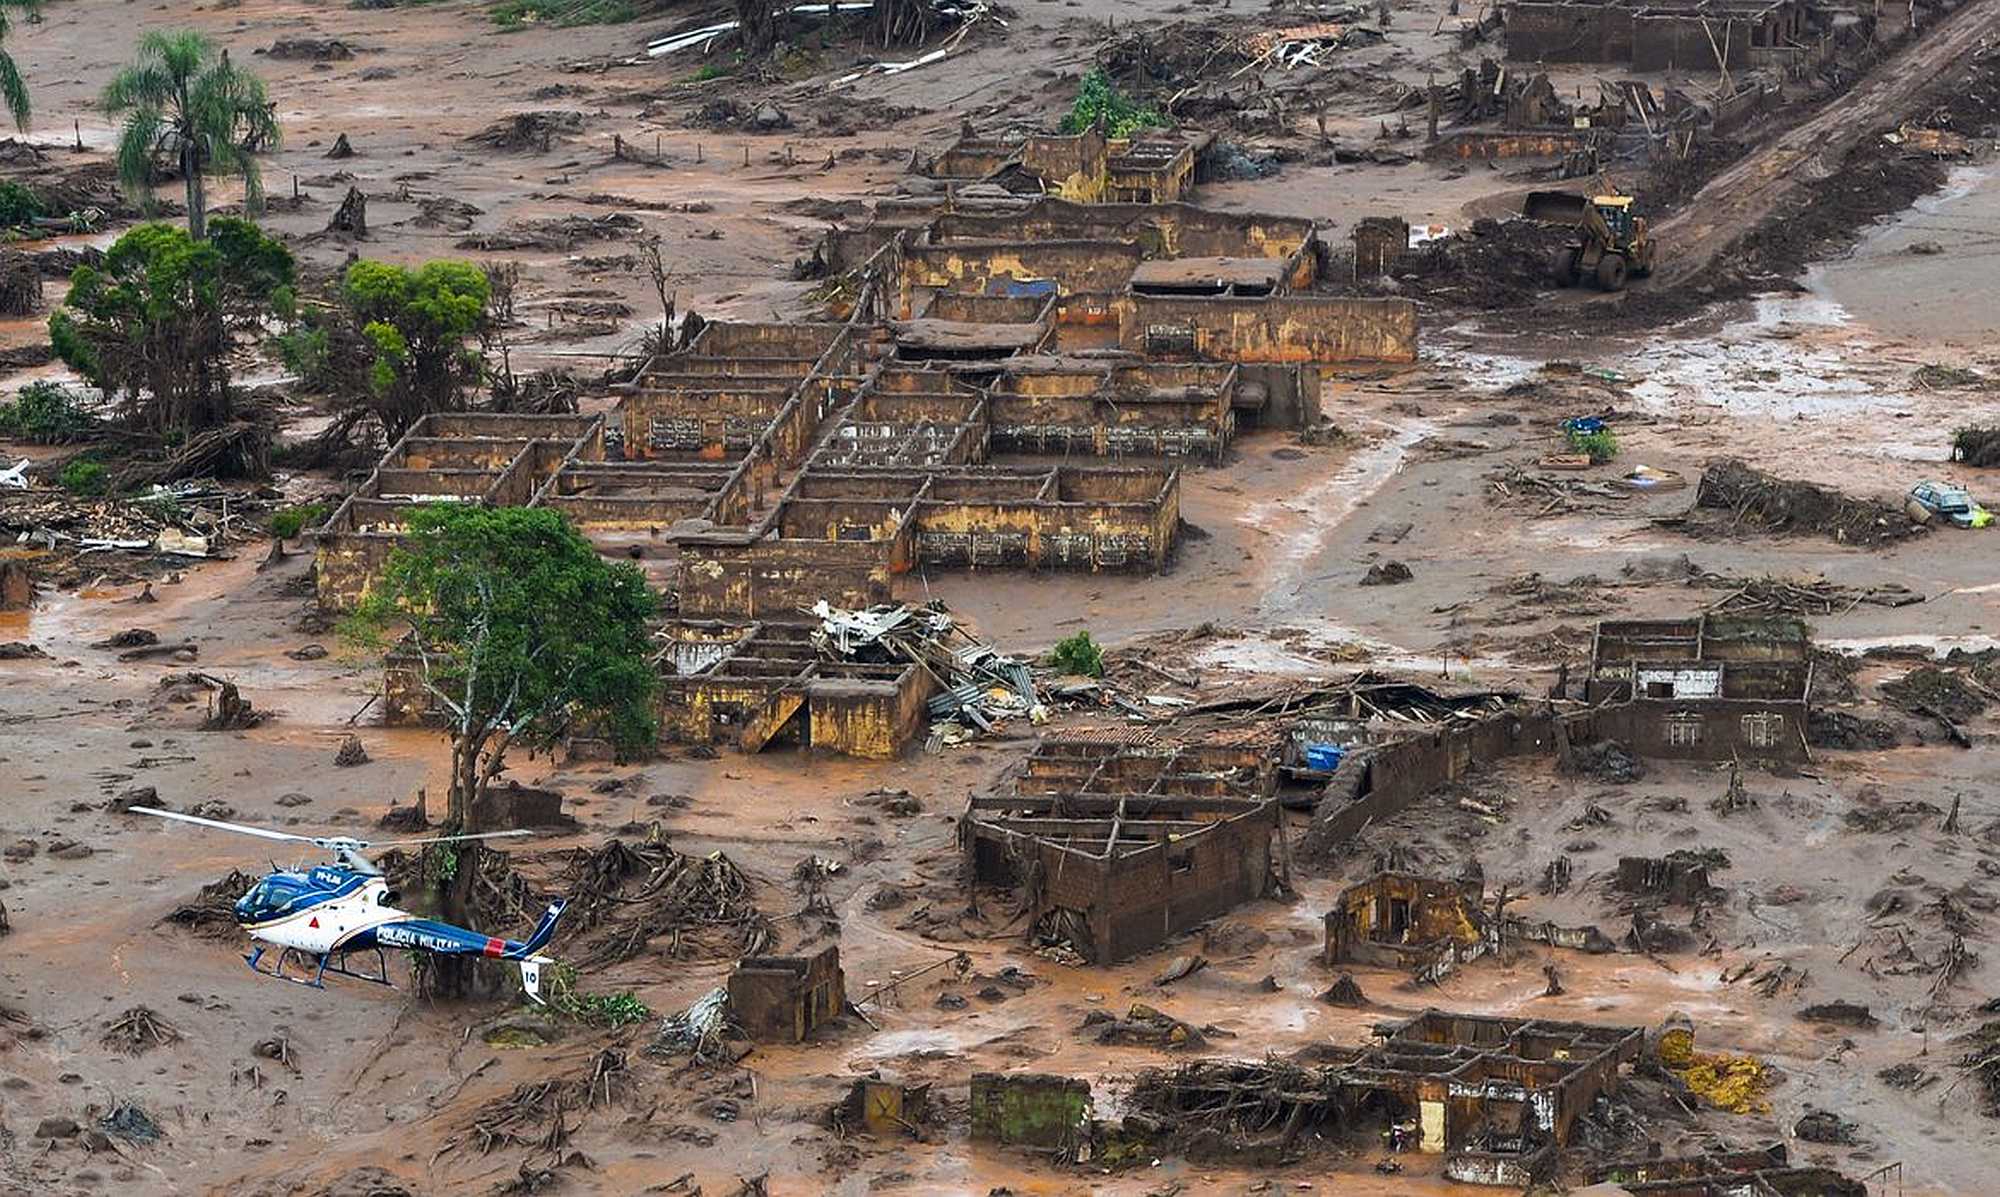 The mine tailings slurry released after the collapse caused 19 deaths - Antonio Cruz/Agência Brasil